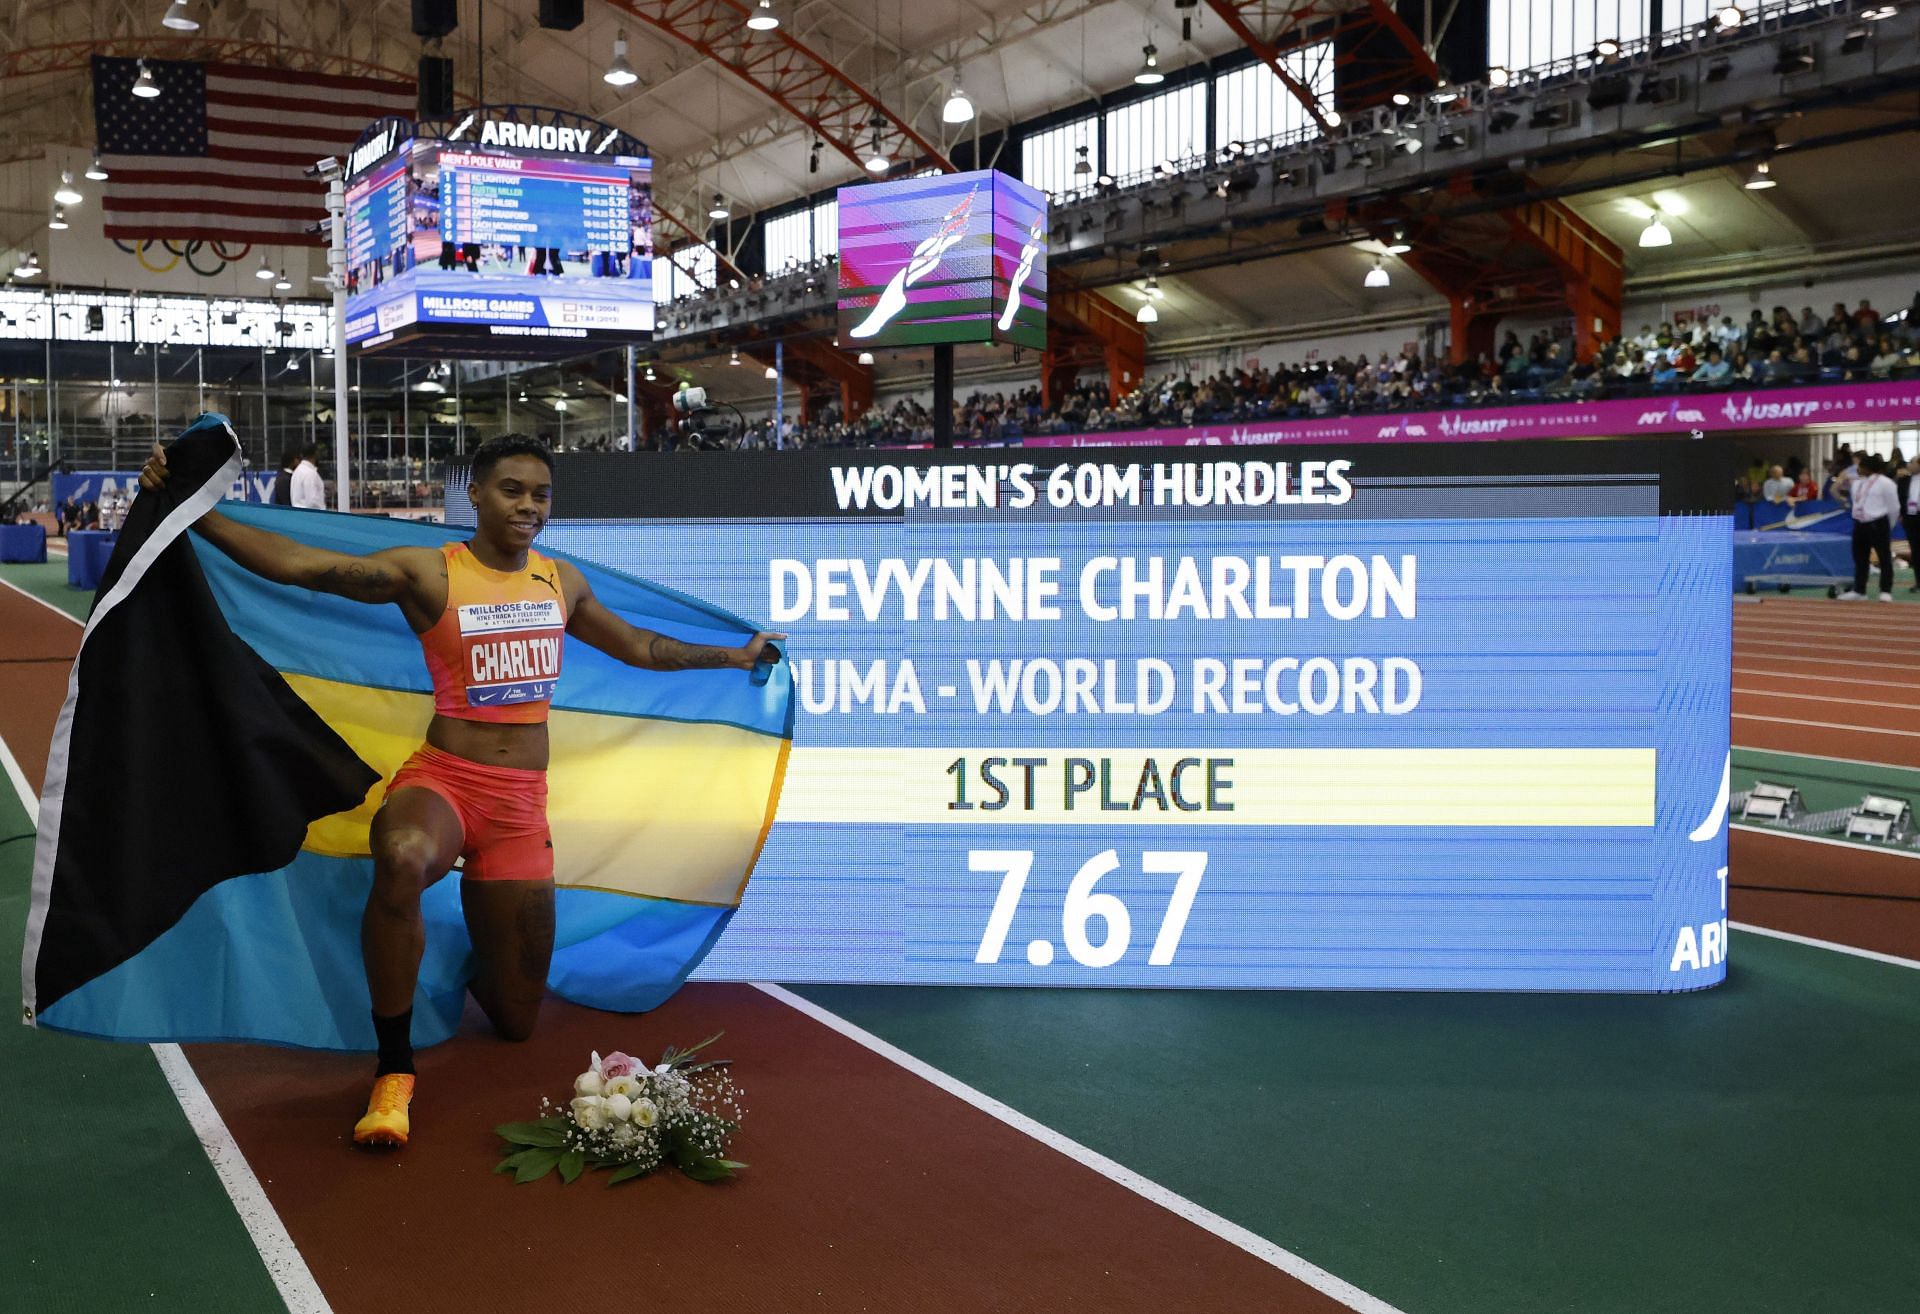 Devynne Charlton sets the world record of 7.67 winning the Women&#039;s 60m Hurdles during the 116th Millrose Games in New York City.